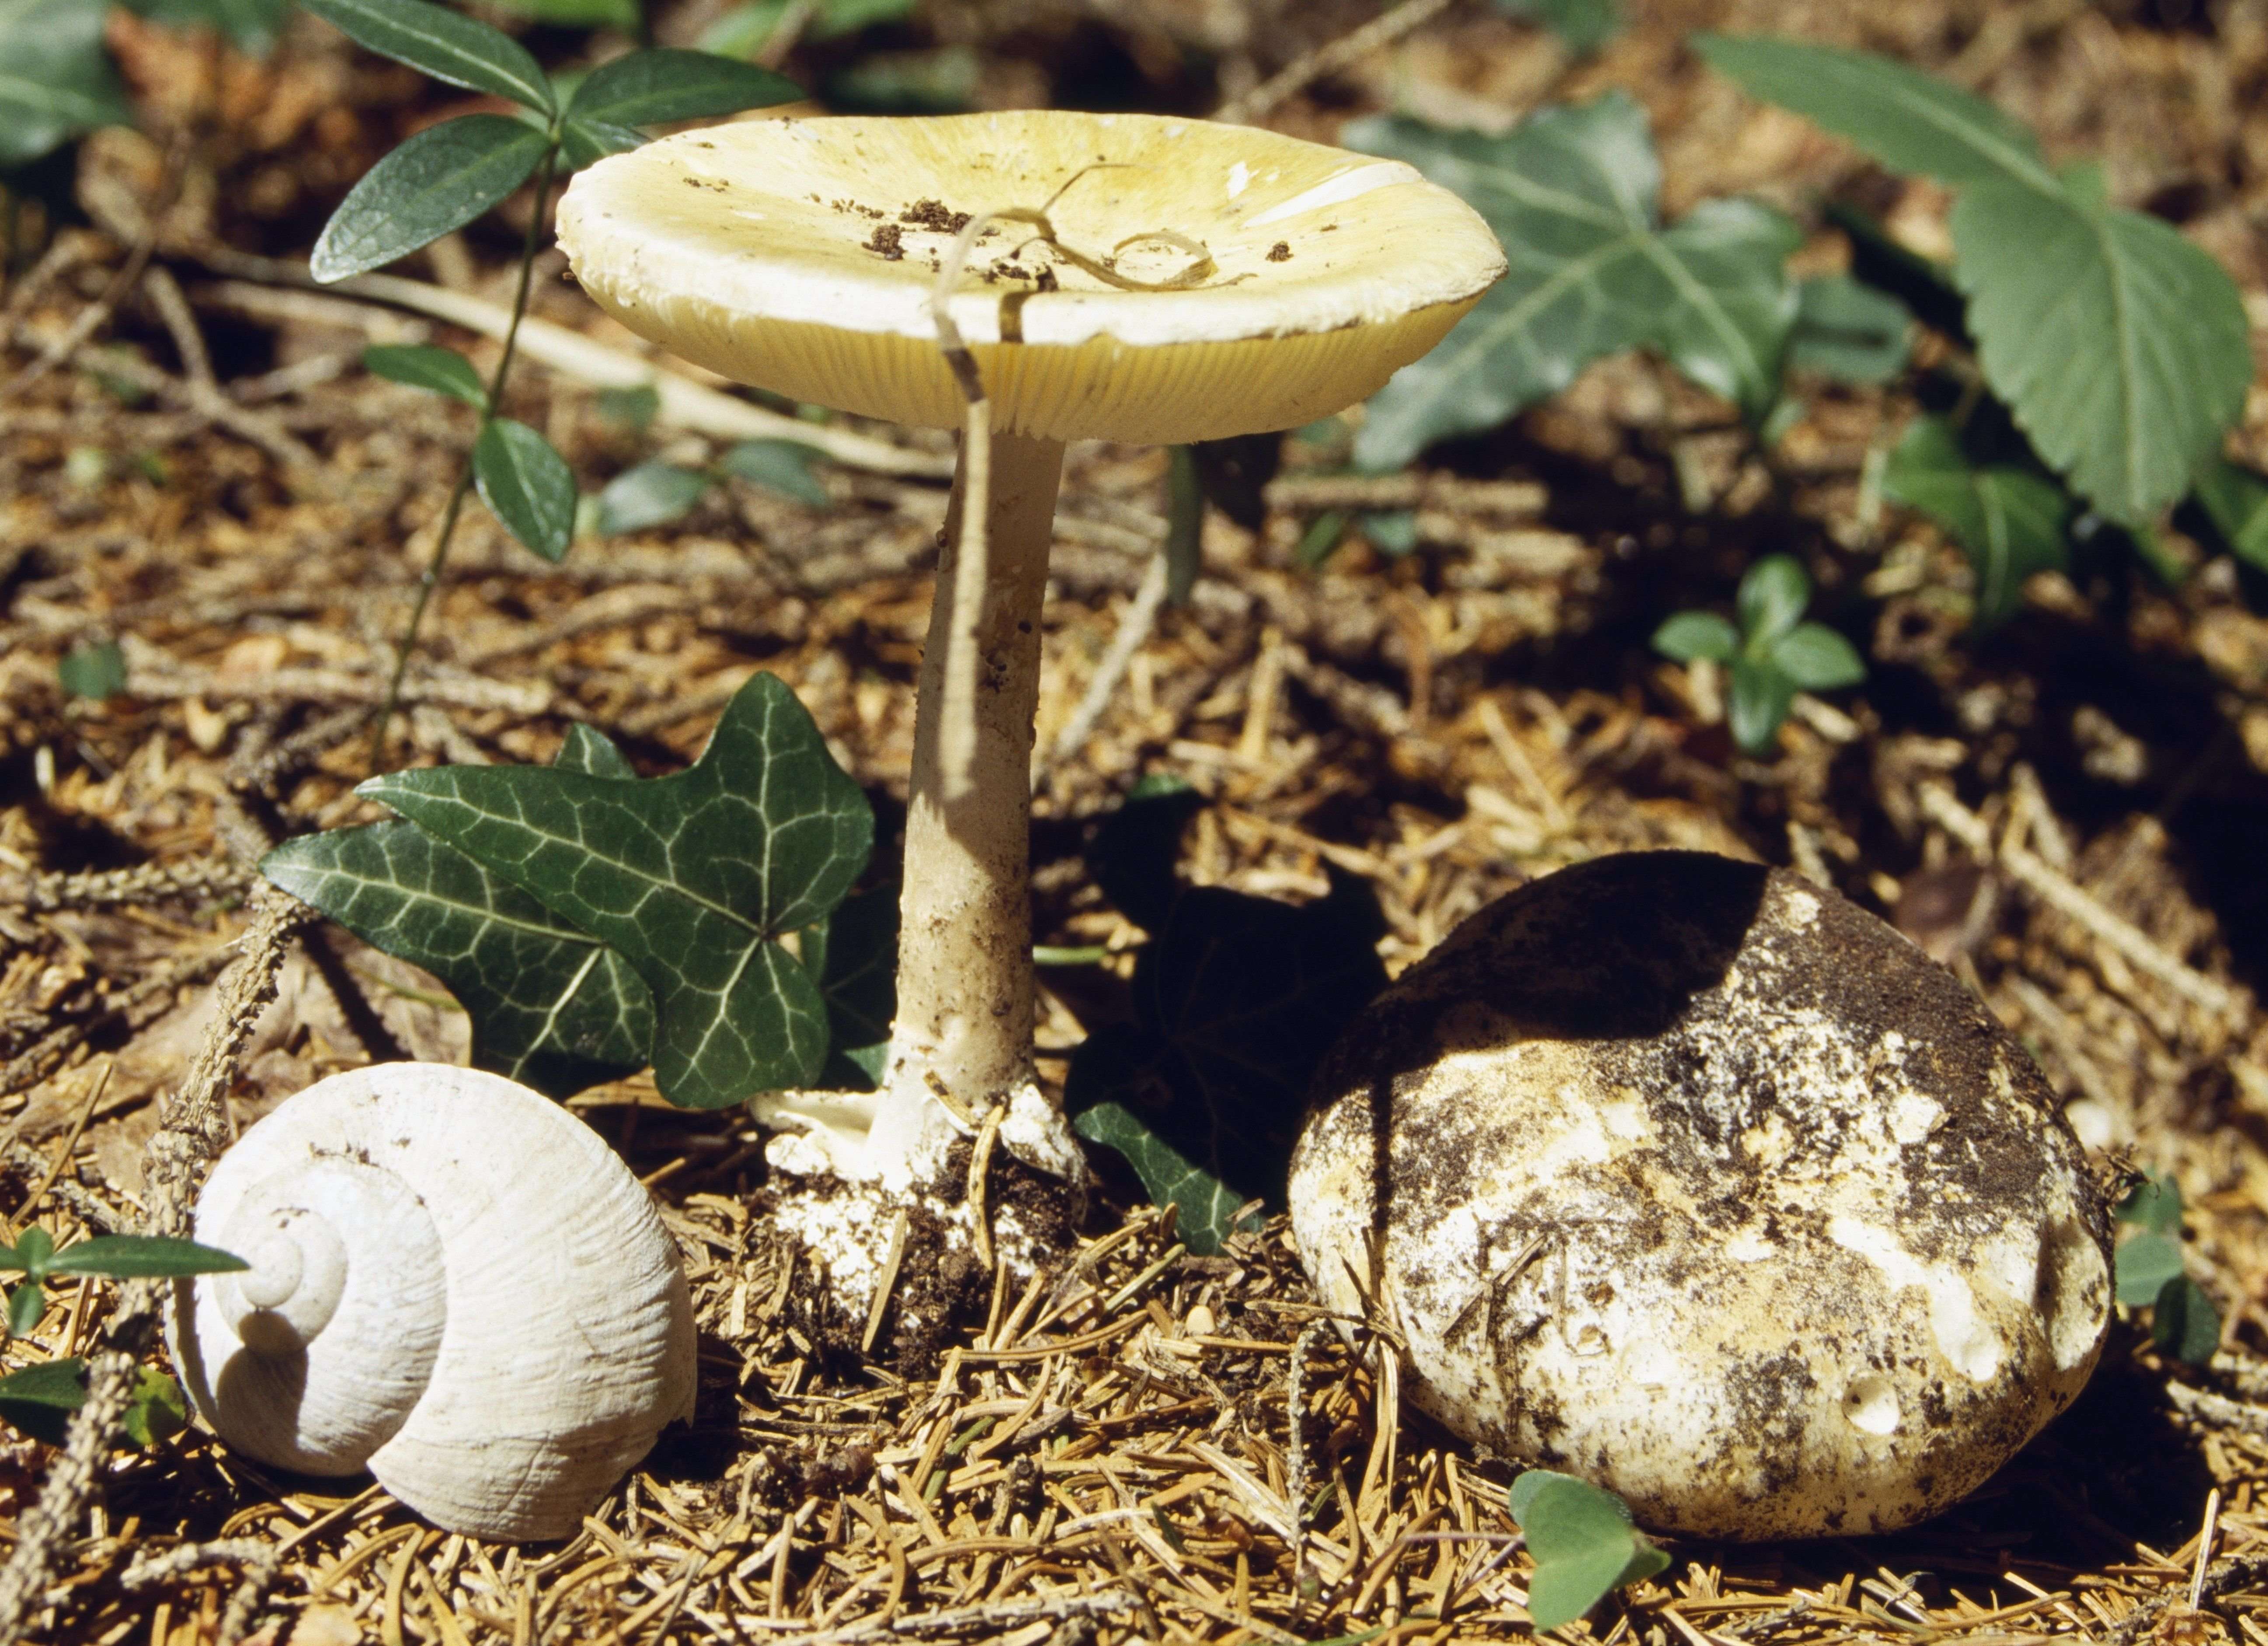 image for 14 Poisoned By Wild Death Cap Mushrooms In California